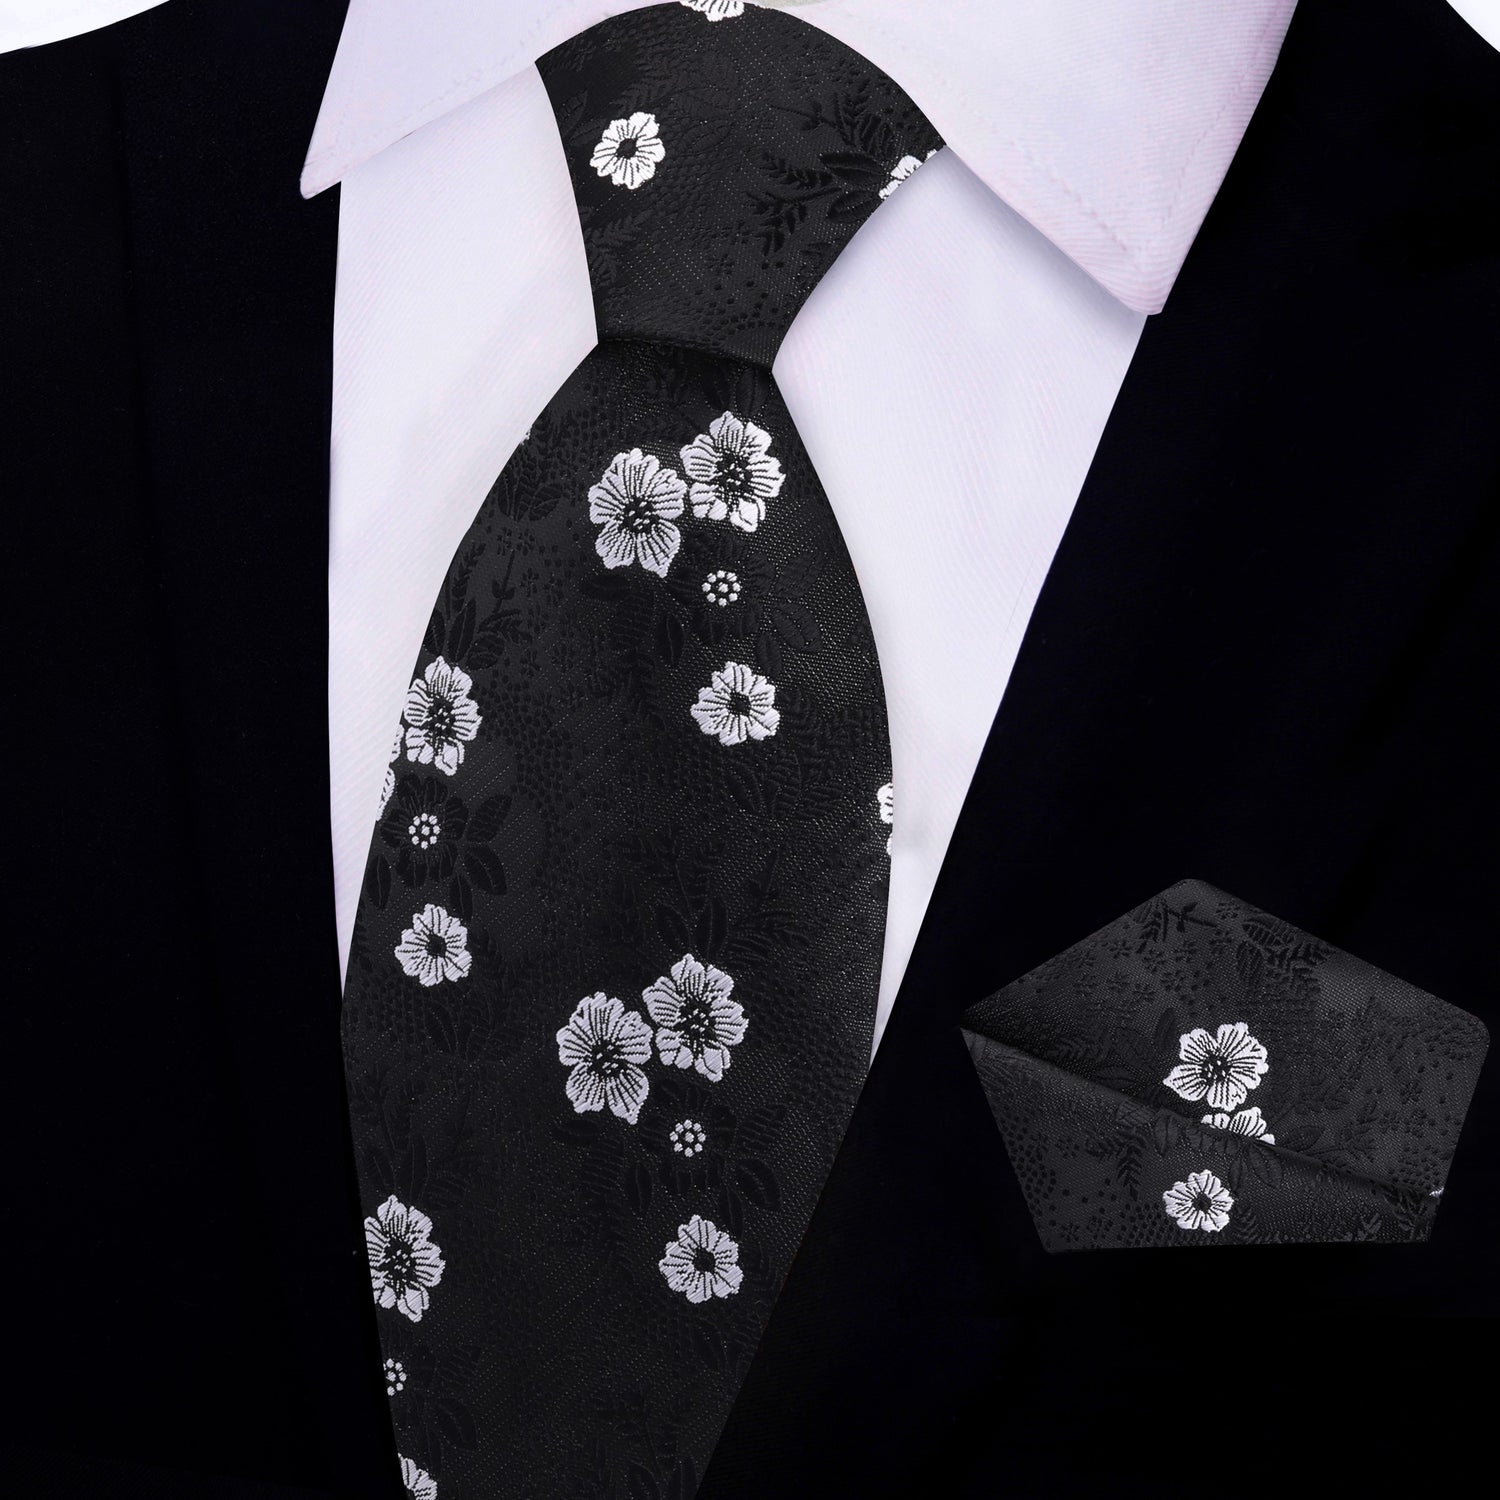 Image 2: Black and White Floral Tie and Pocket Square